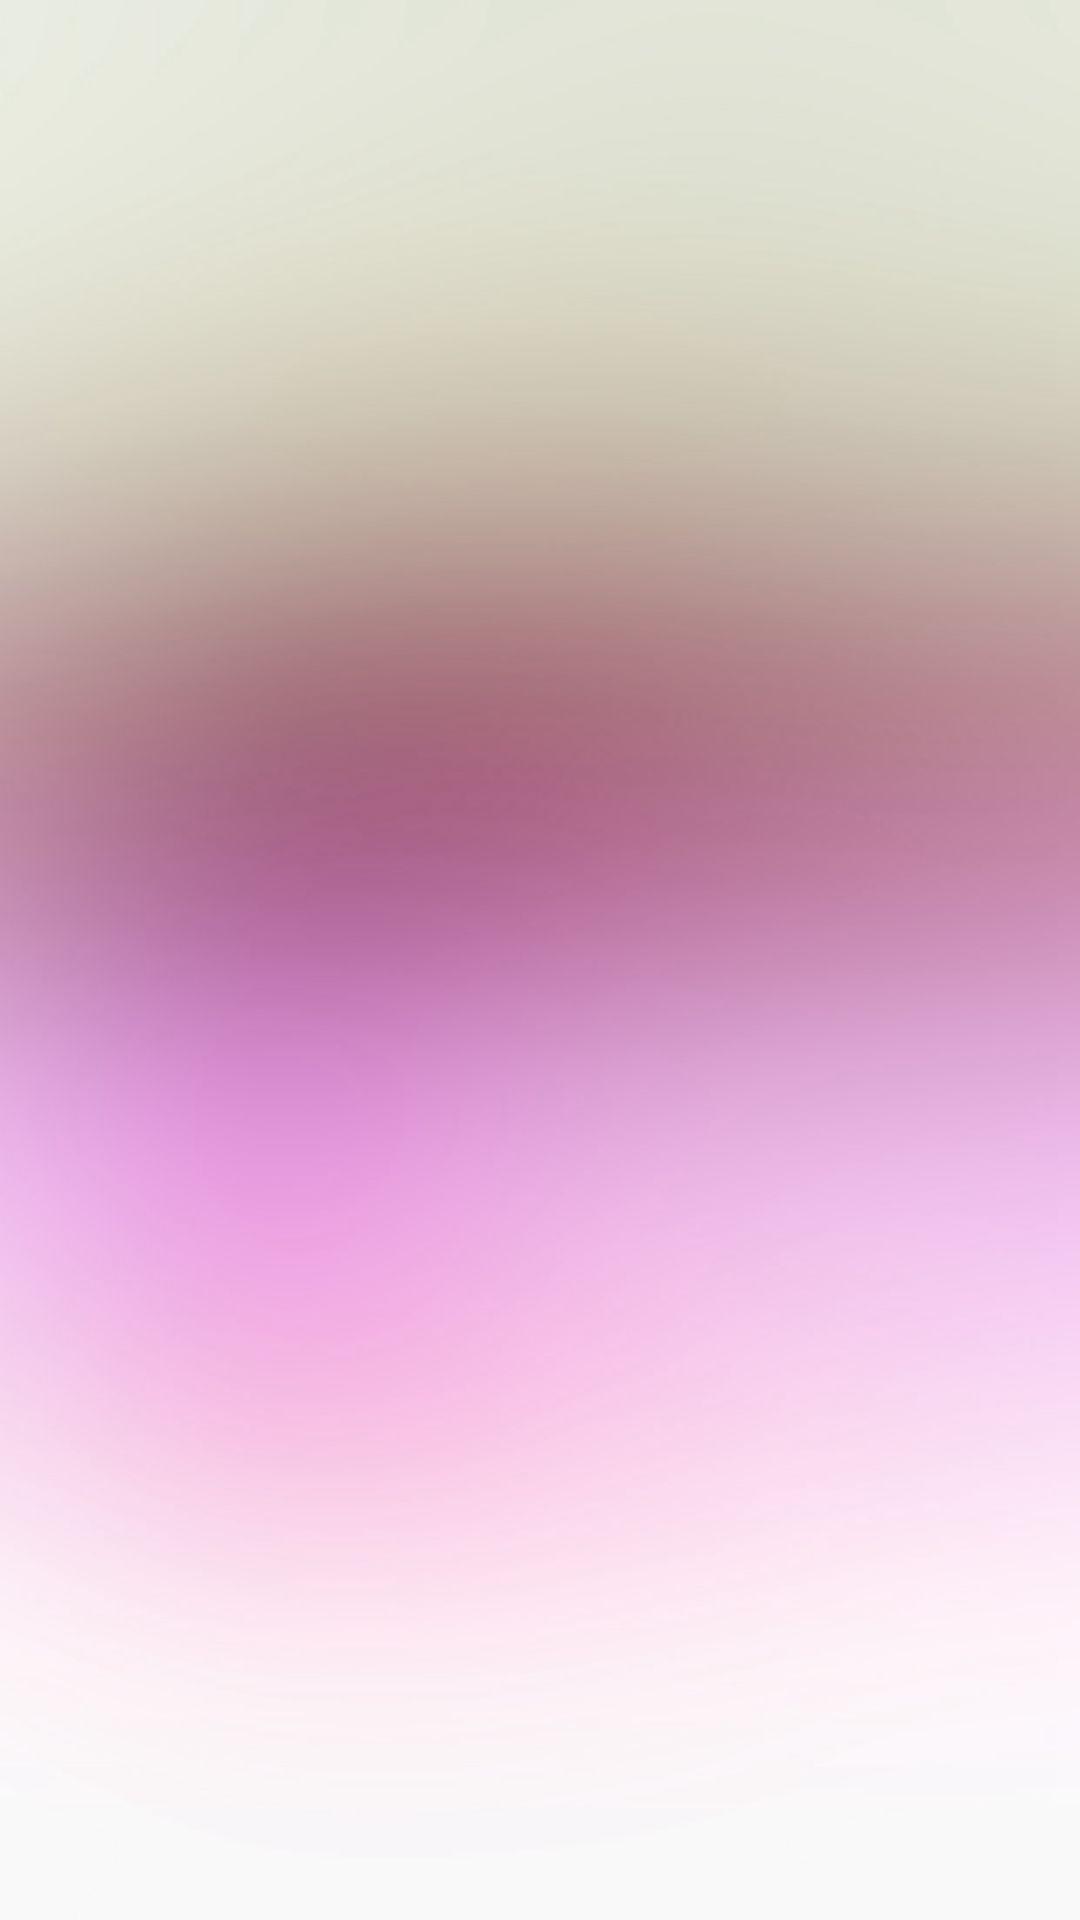 Red Morning Day Gradation Blur iPhone 6 wallpaper. Colors